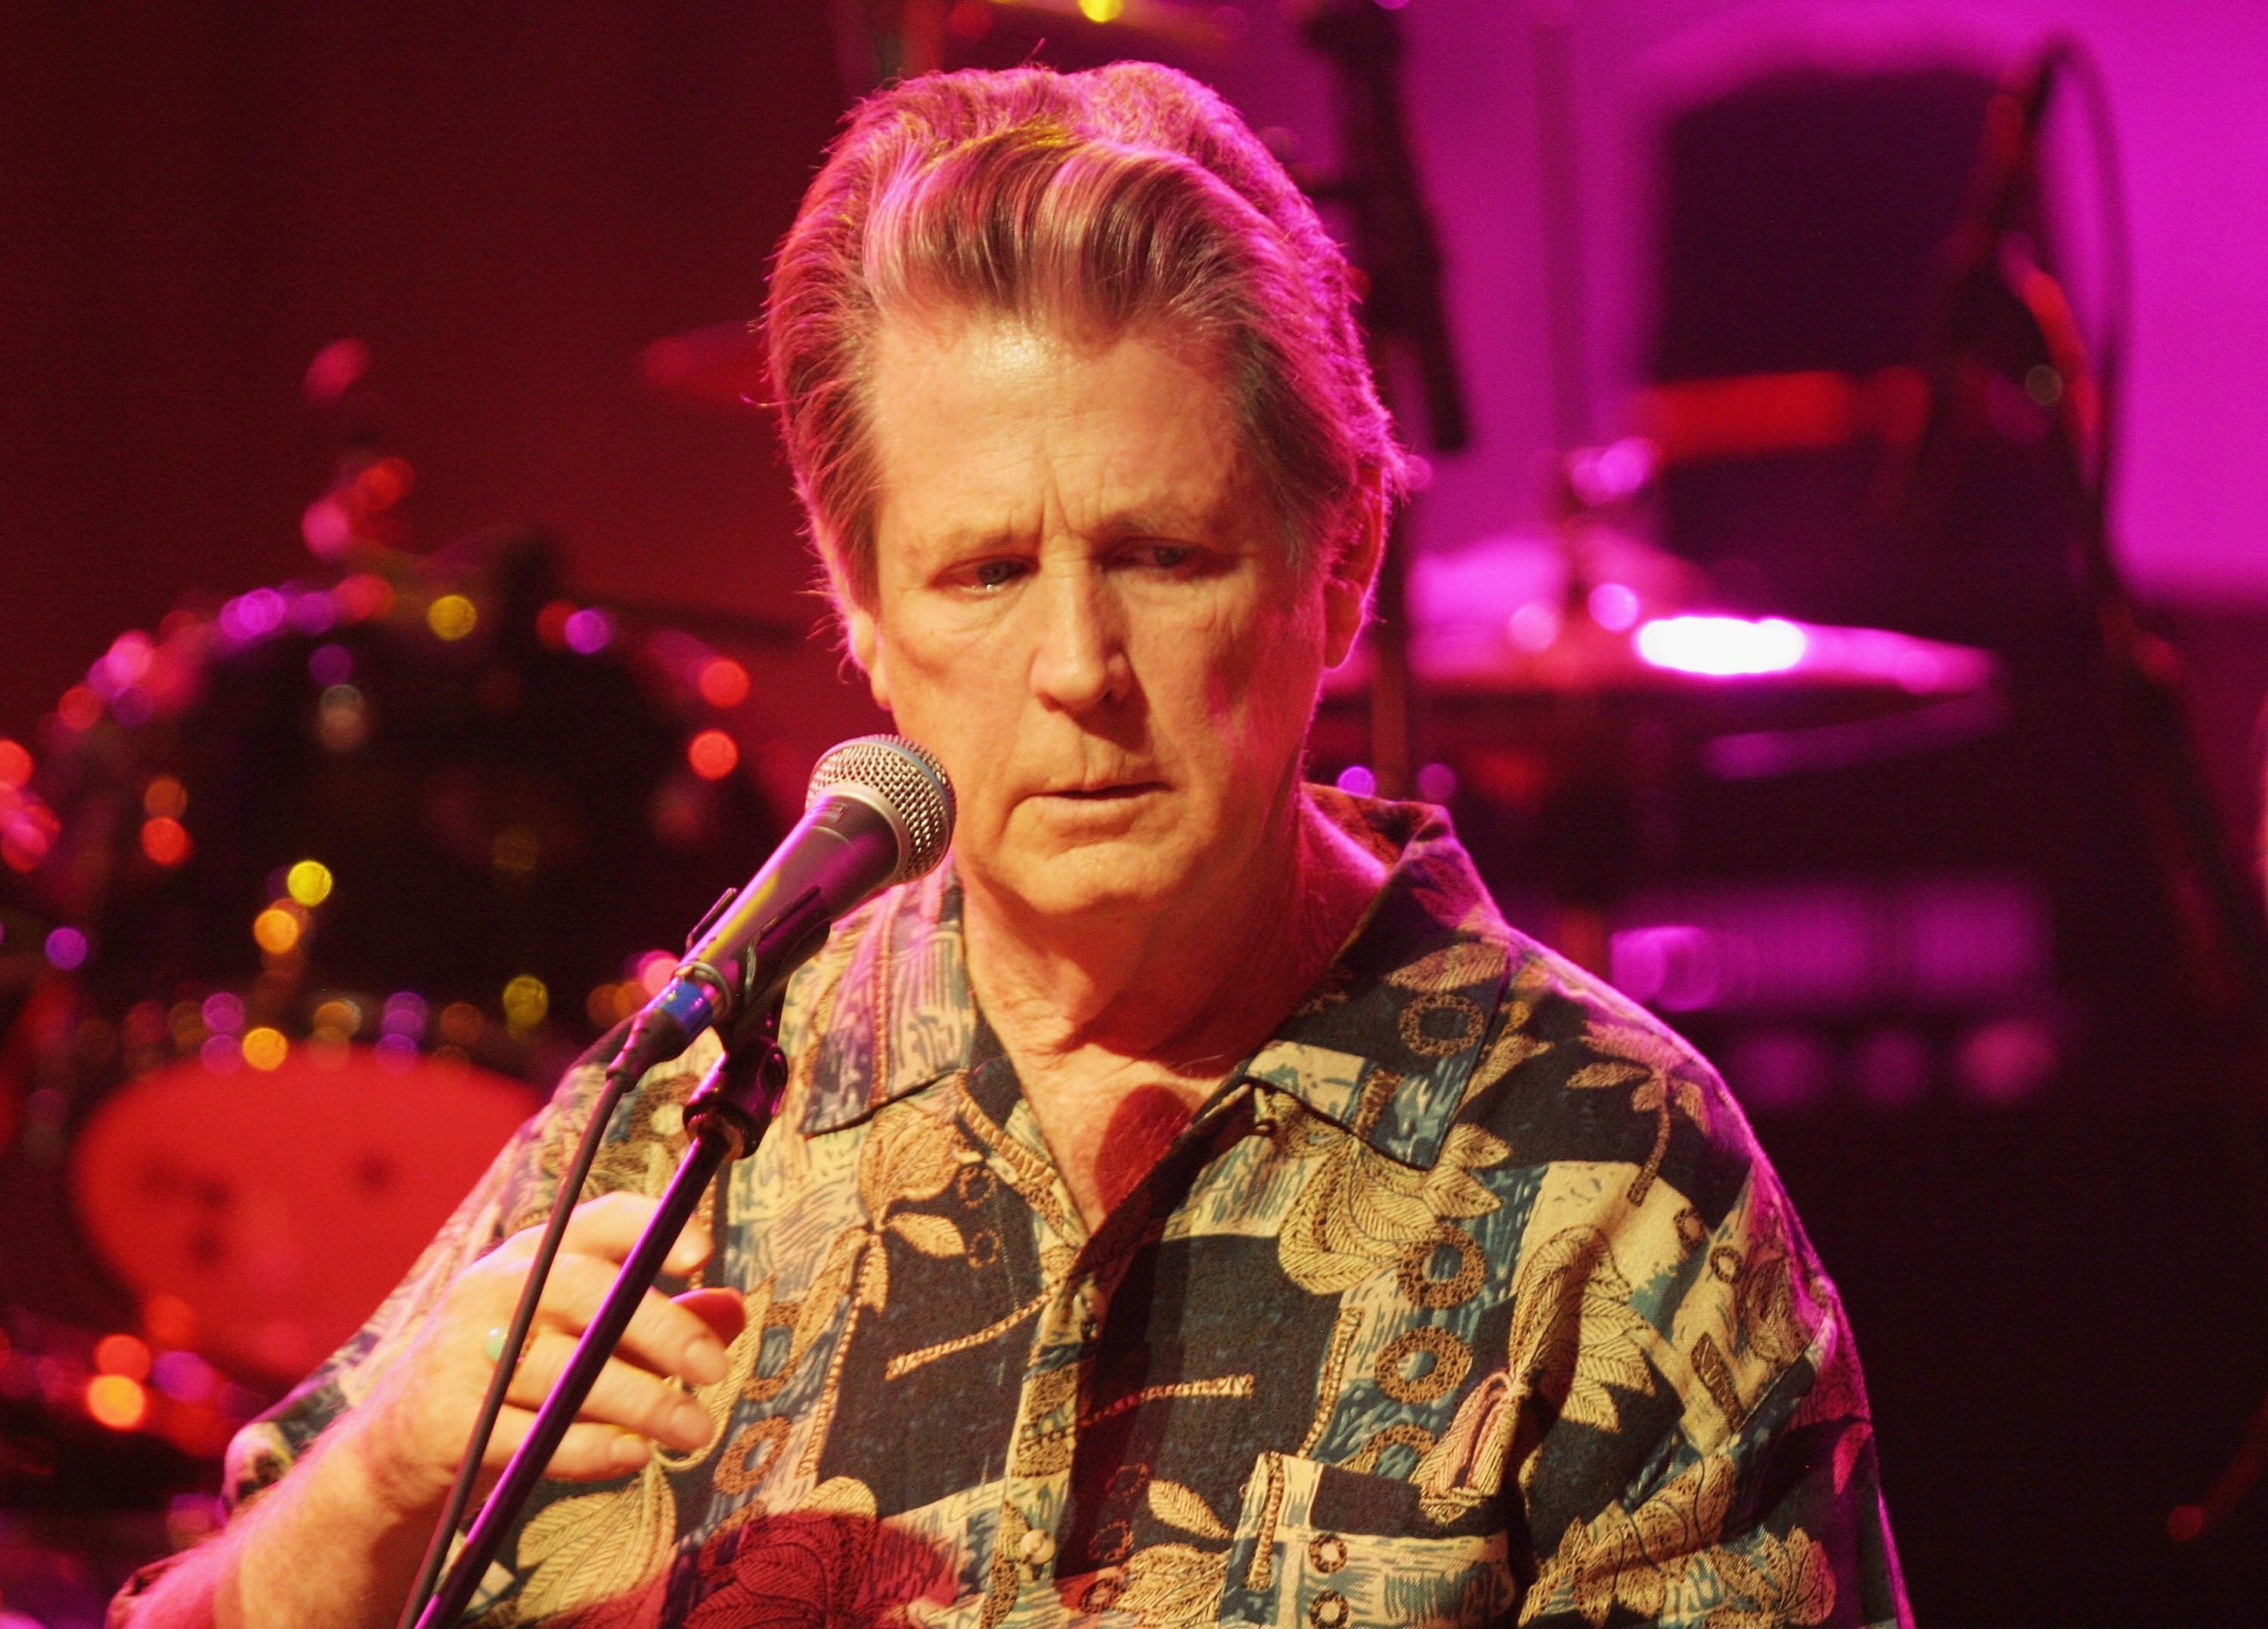 Musician Brian Wilson performs songs from 'SMiLE' at the Walt Disney Concert Hall